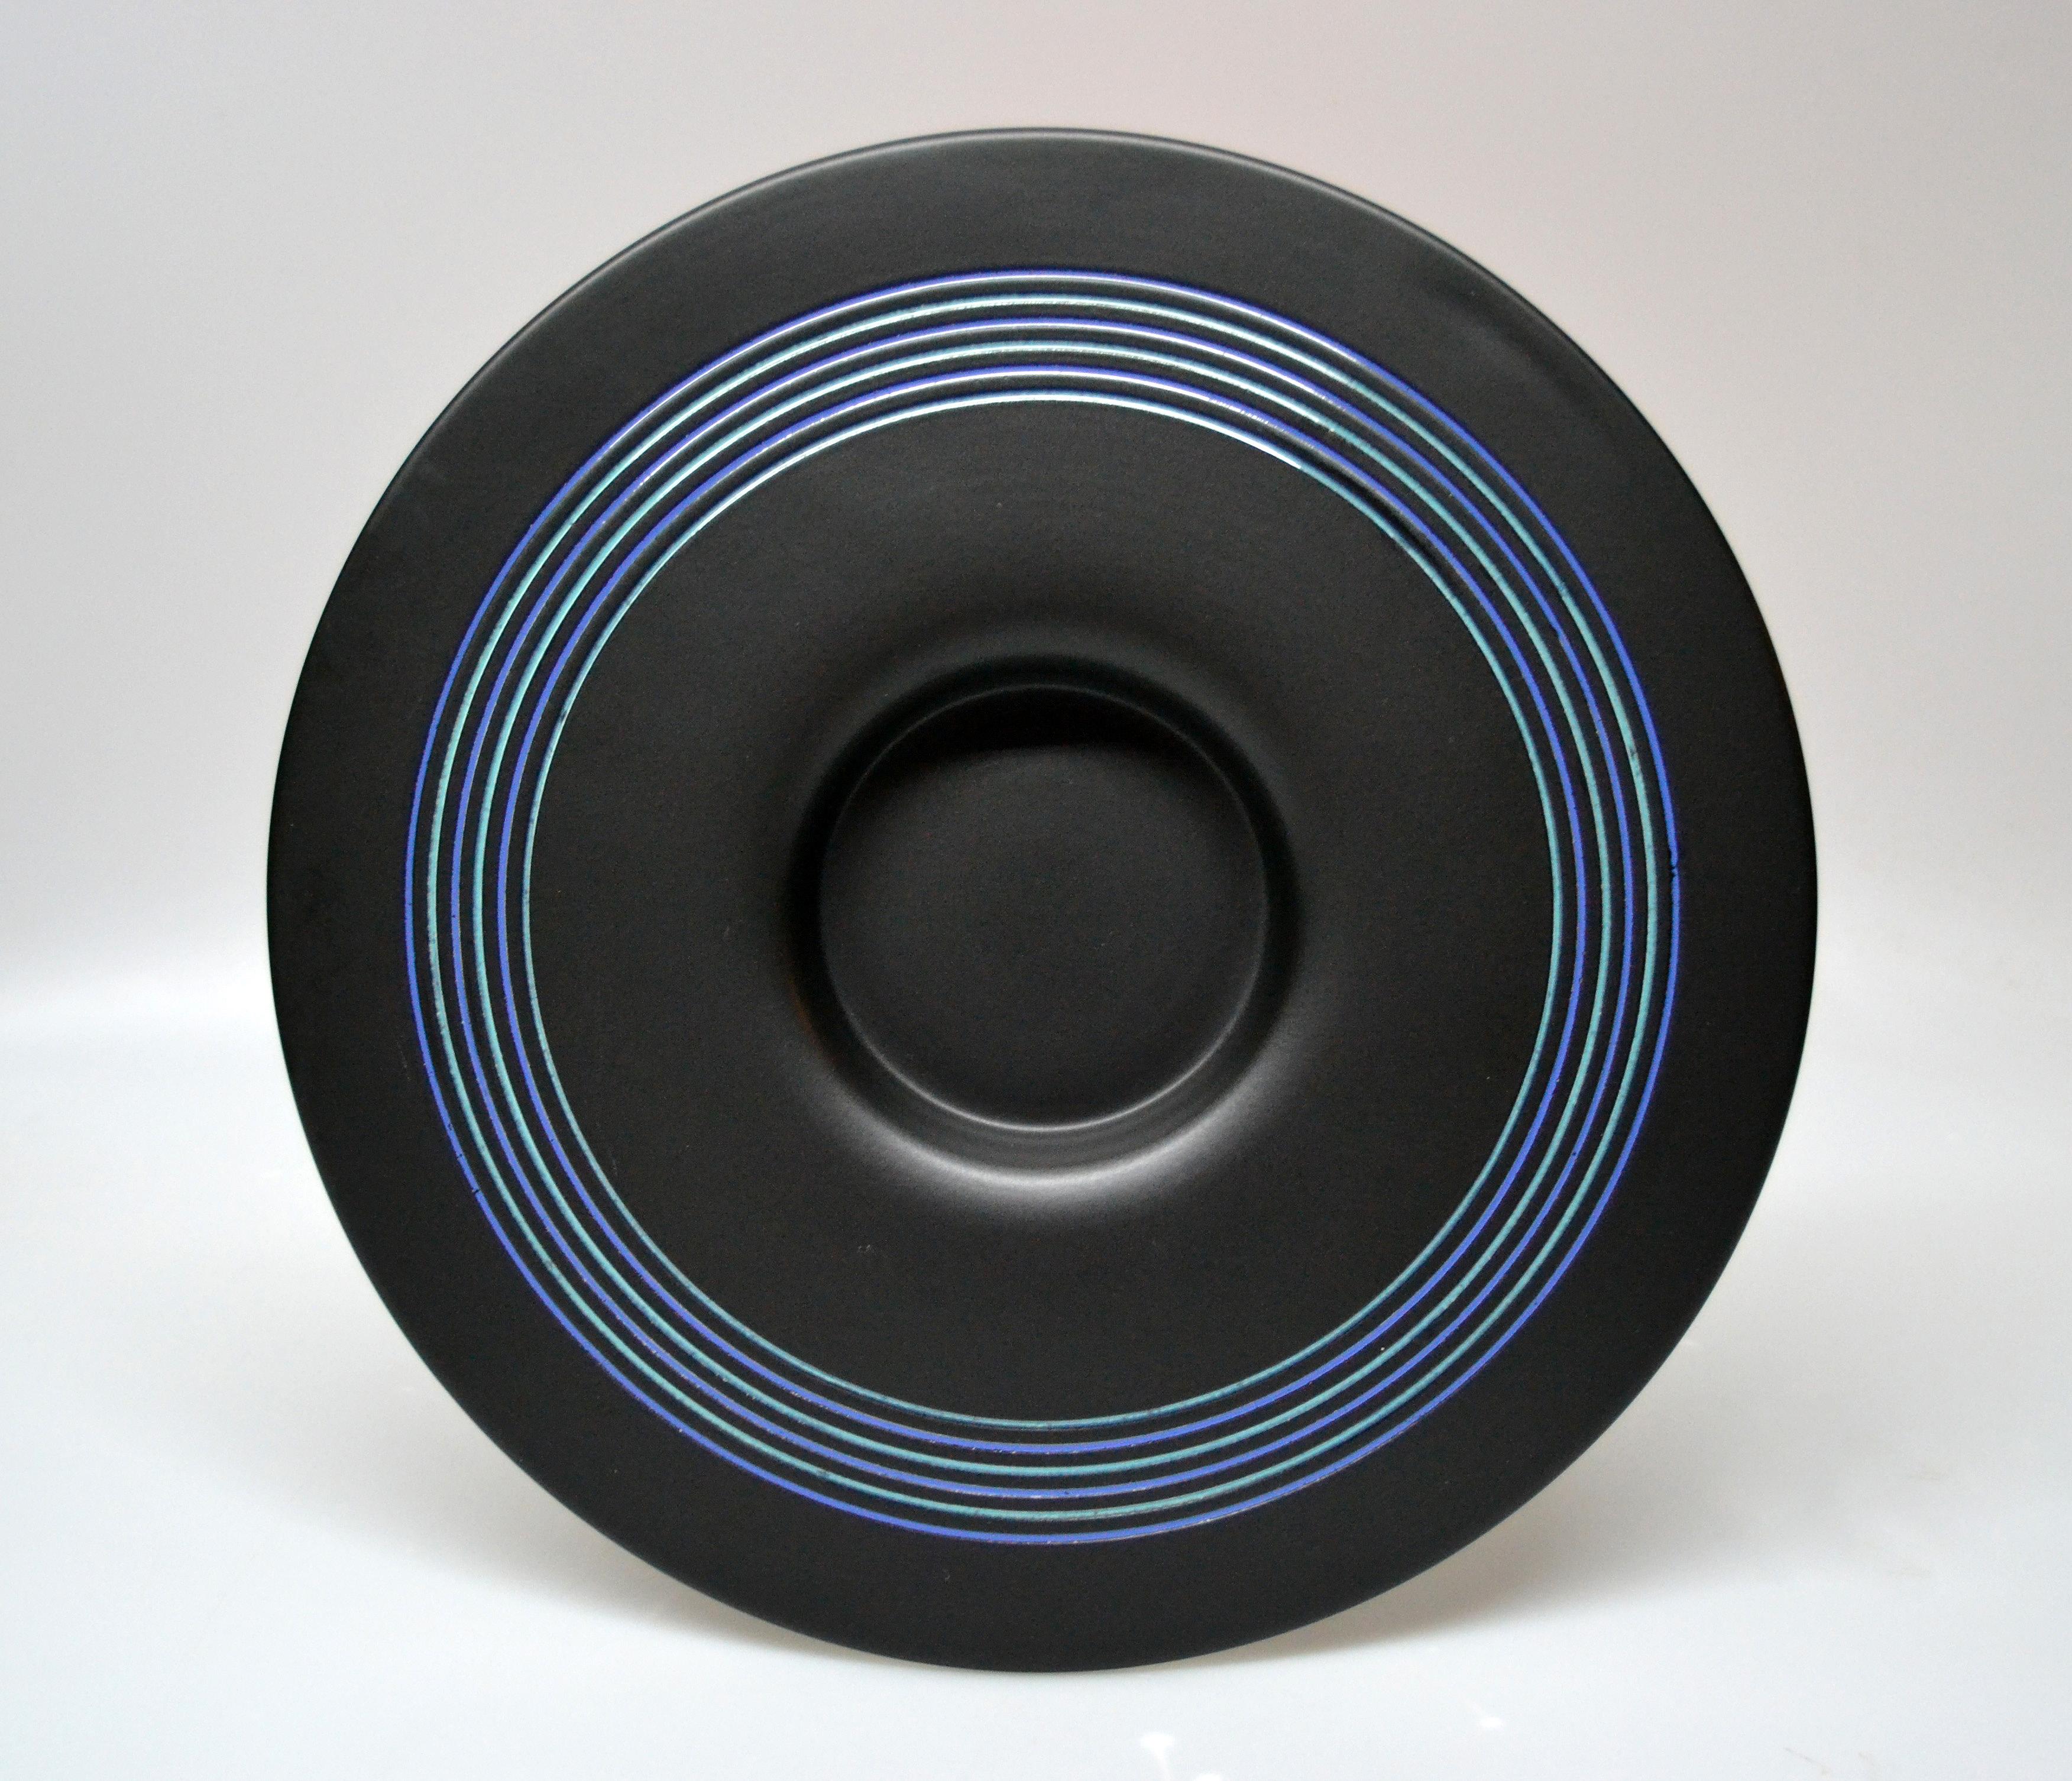 Sicart Ceramic Plate, Centerpiece, Fruit Bowl in Black & Blue by Boccato, Italy 3